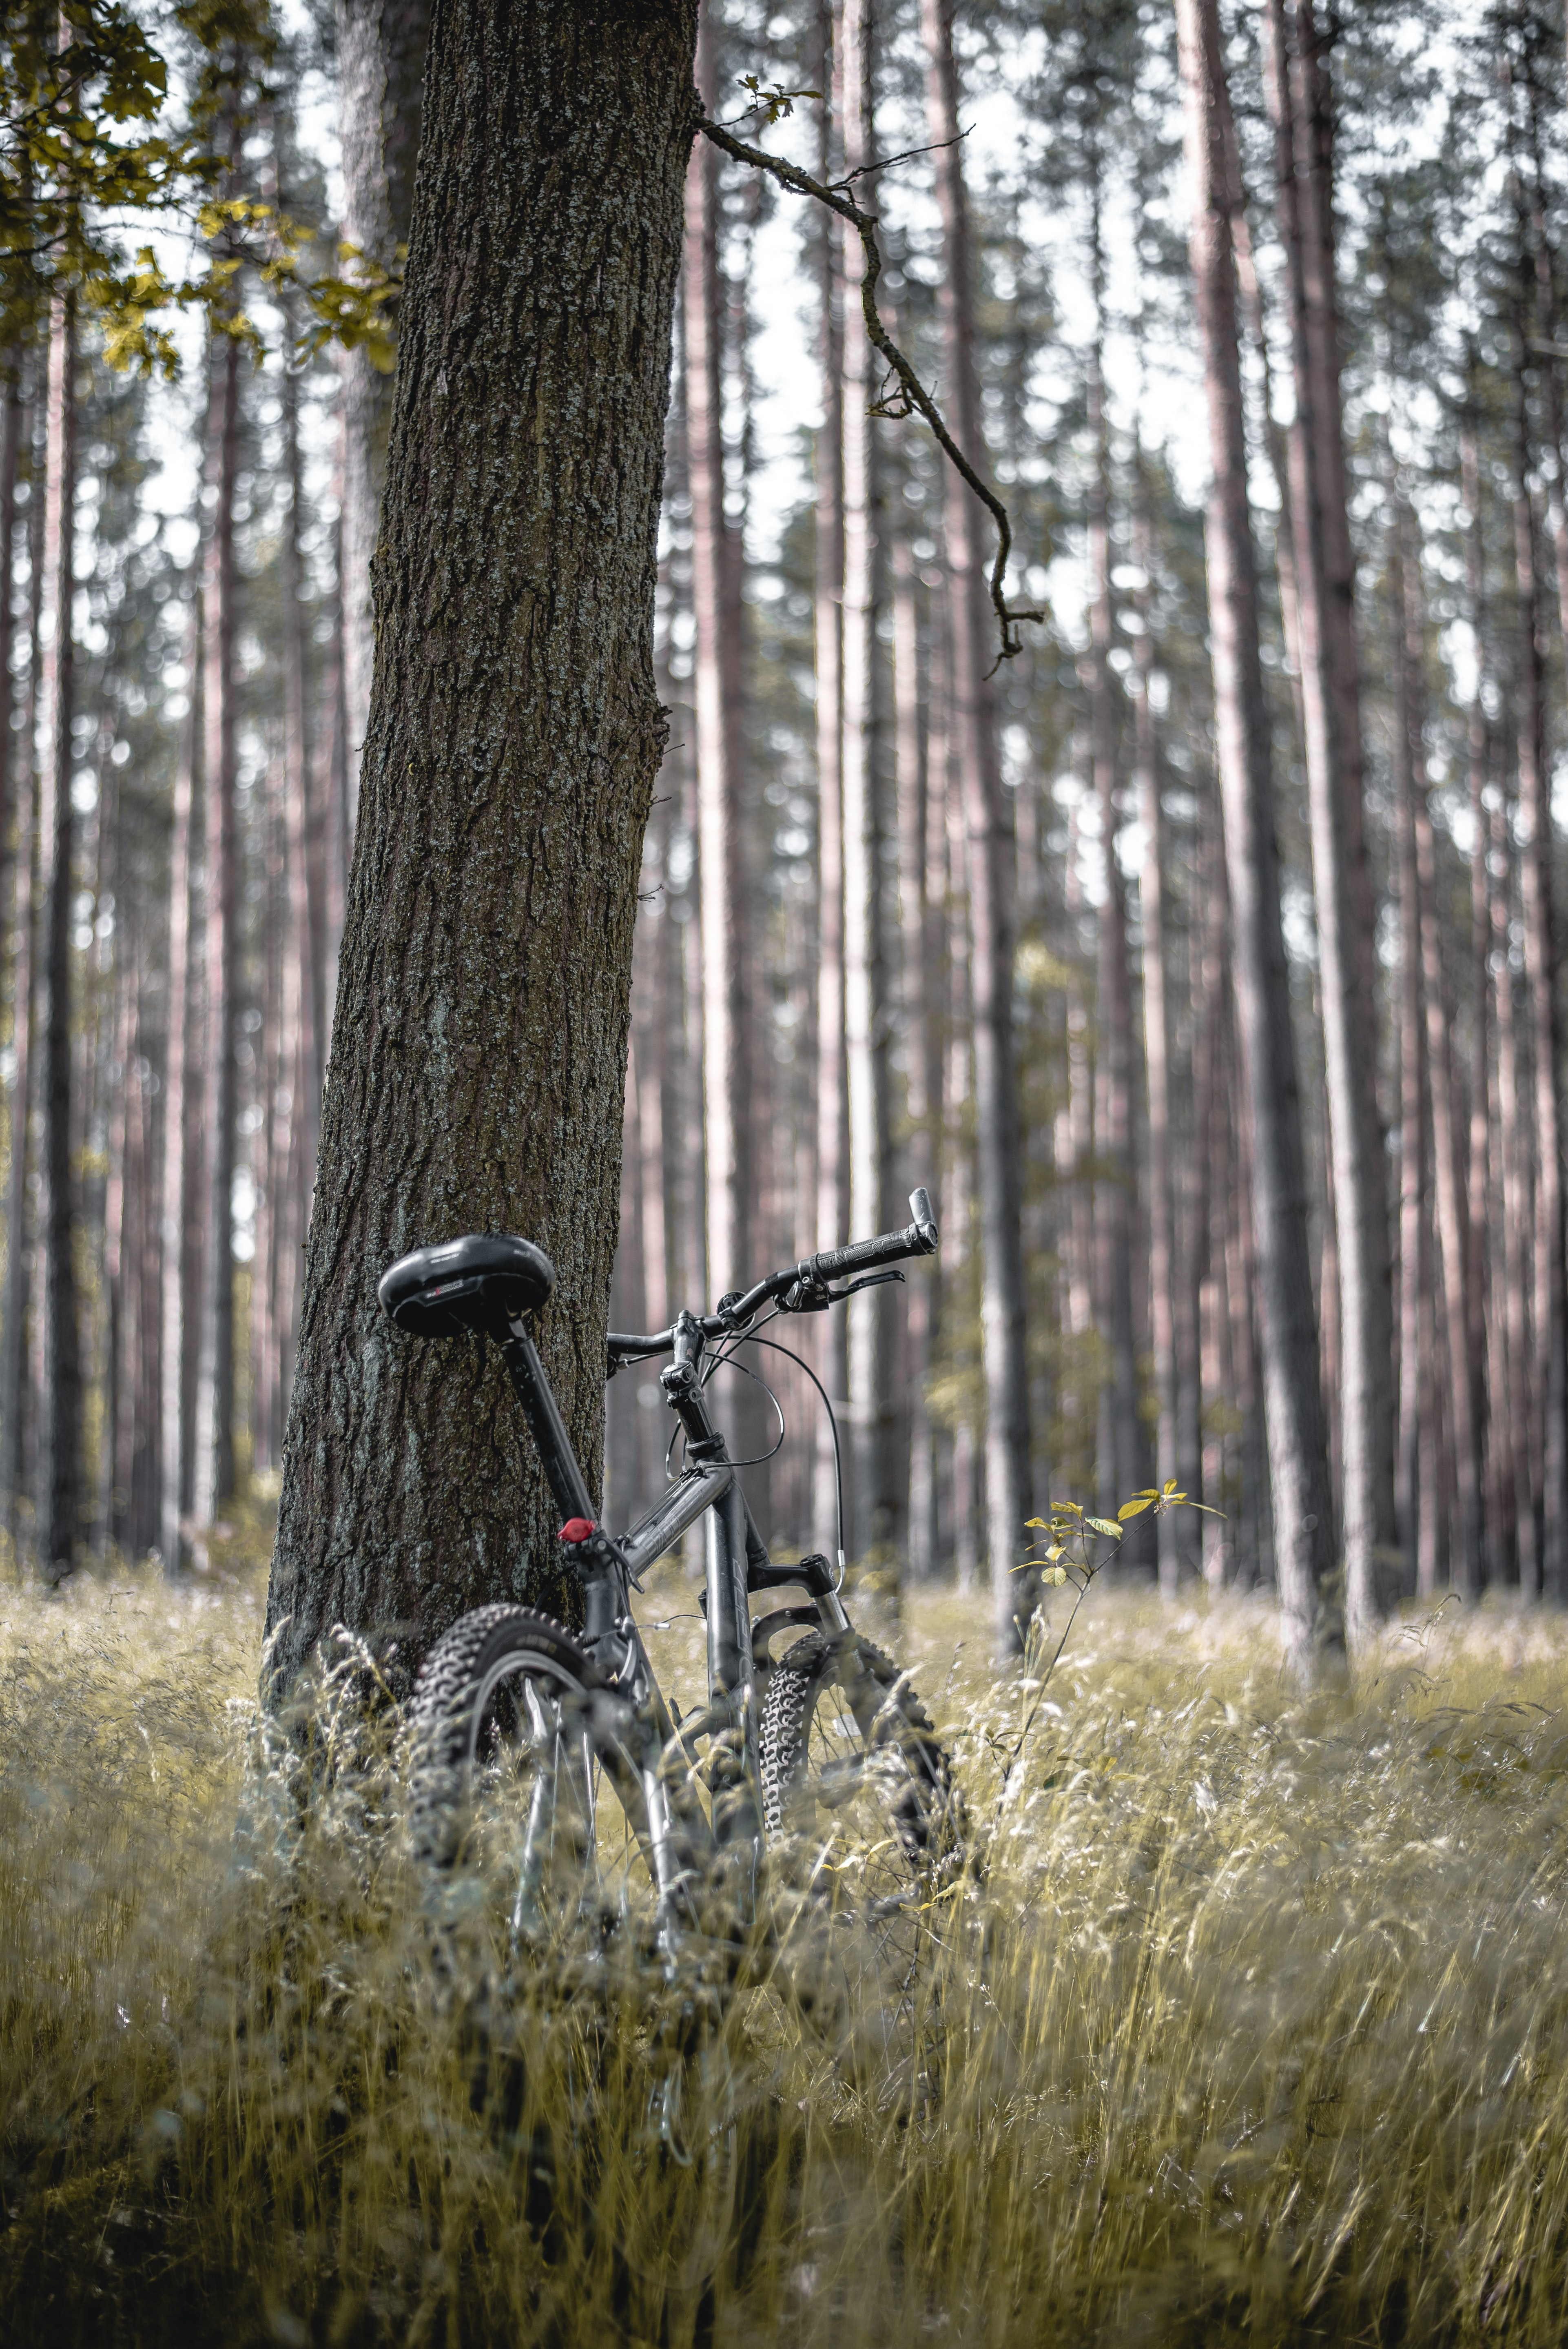 Free HD miscellaneous, trees, miscellanea, forest, stroll, bicycle